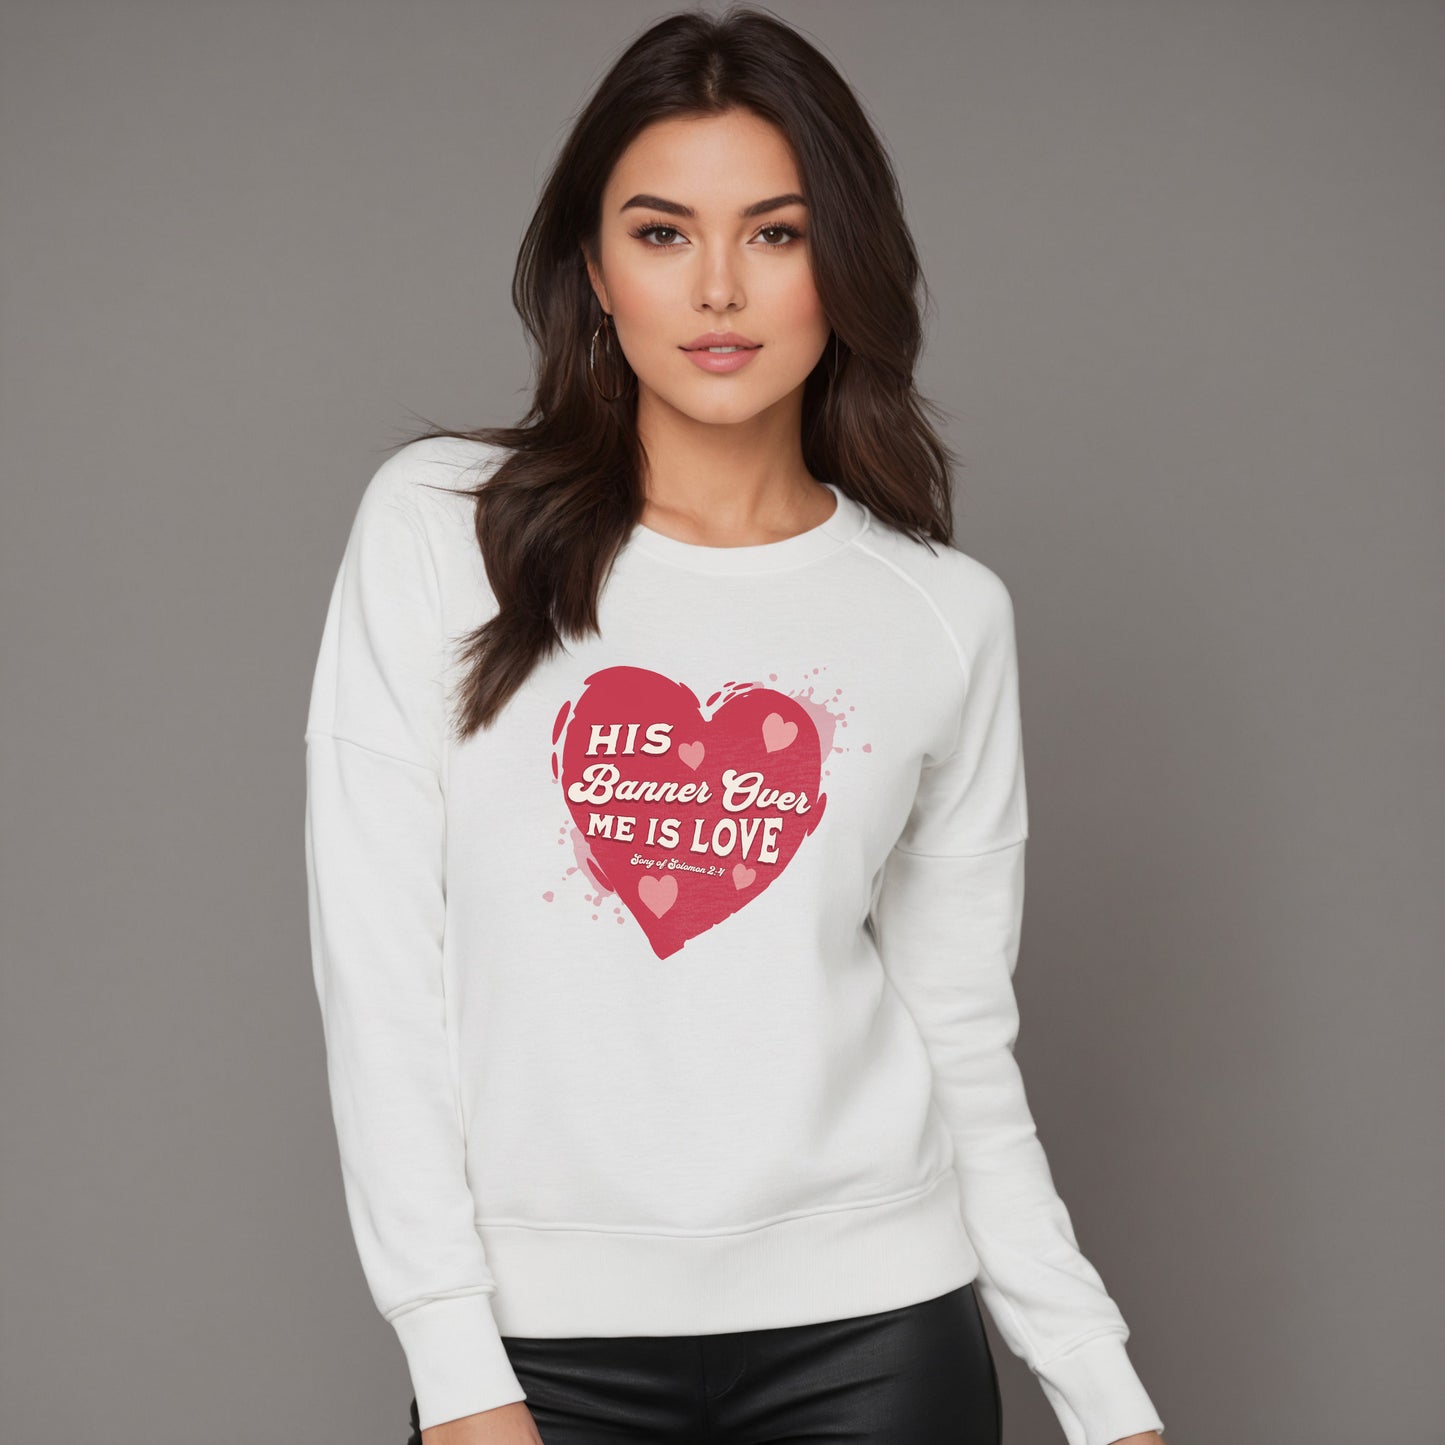 His Banner Over Me is Love sweatshirt in white